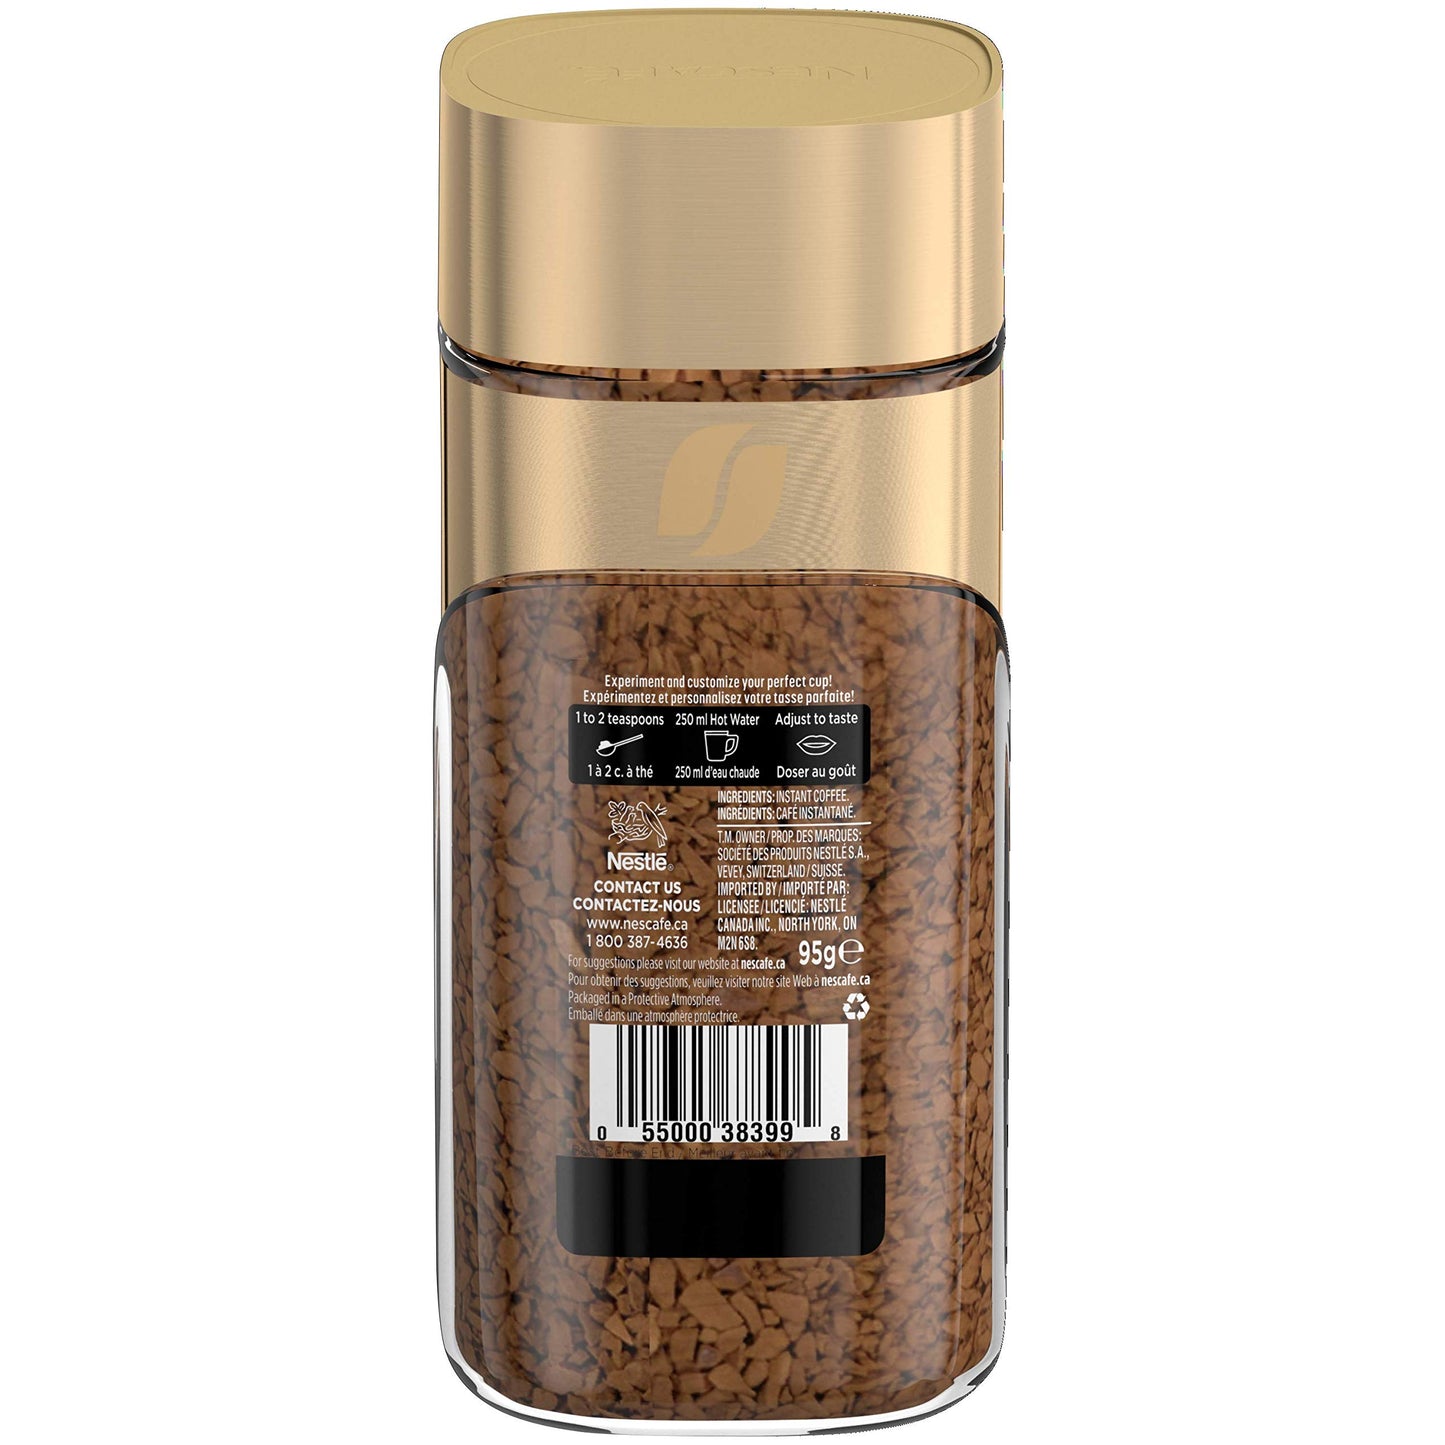 NESCAFE Gold Origins Colombia Coffee Jar 95g/3.4oz (Shipped from Canada)